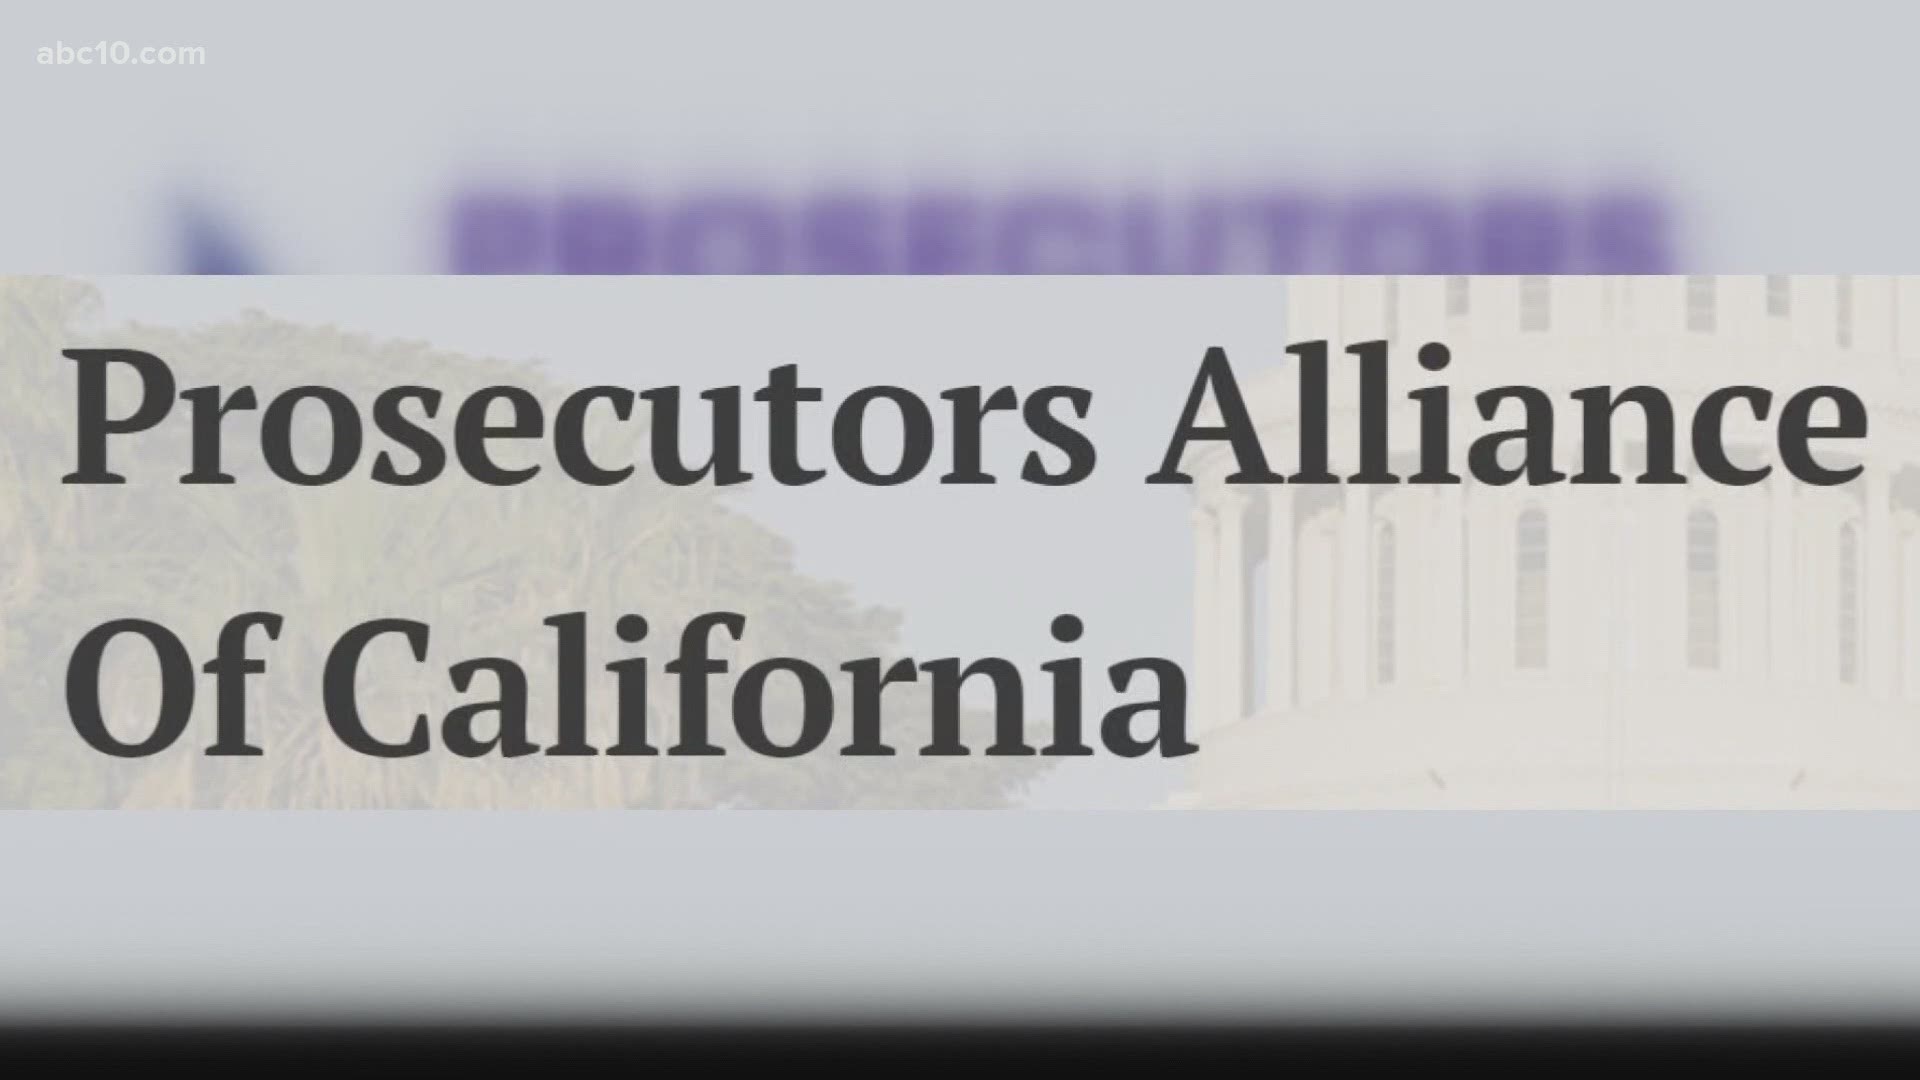 The non-profit, Prosecutors Alliance of California, wants to advocate for comprehensive reforms to the state's justice system.